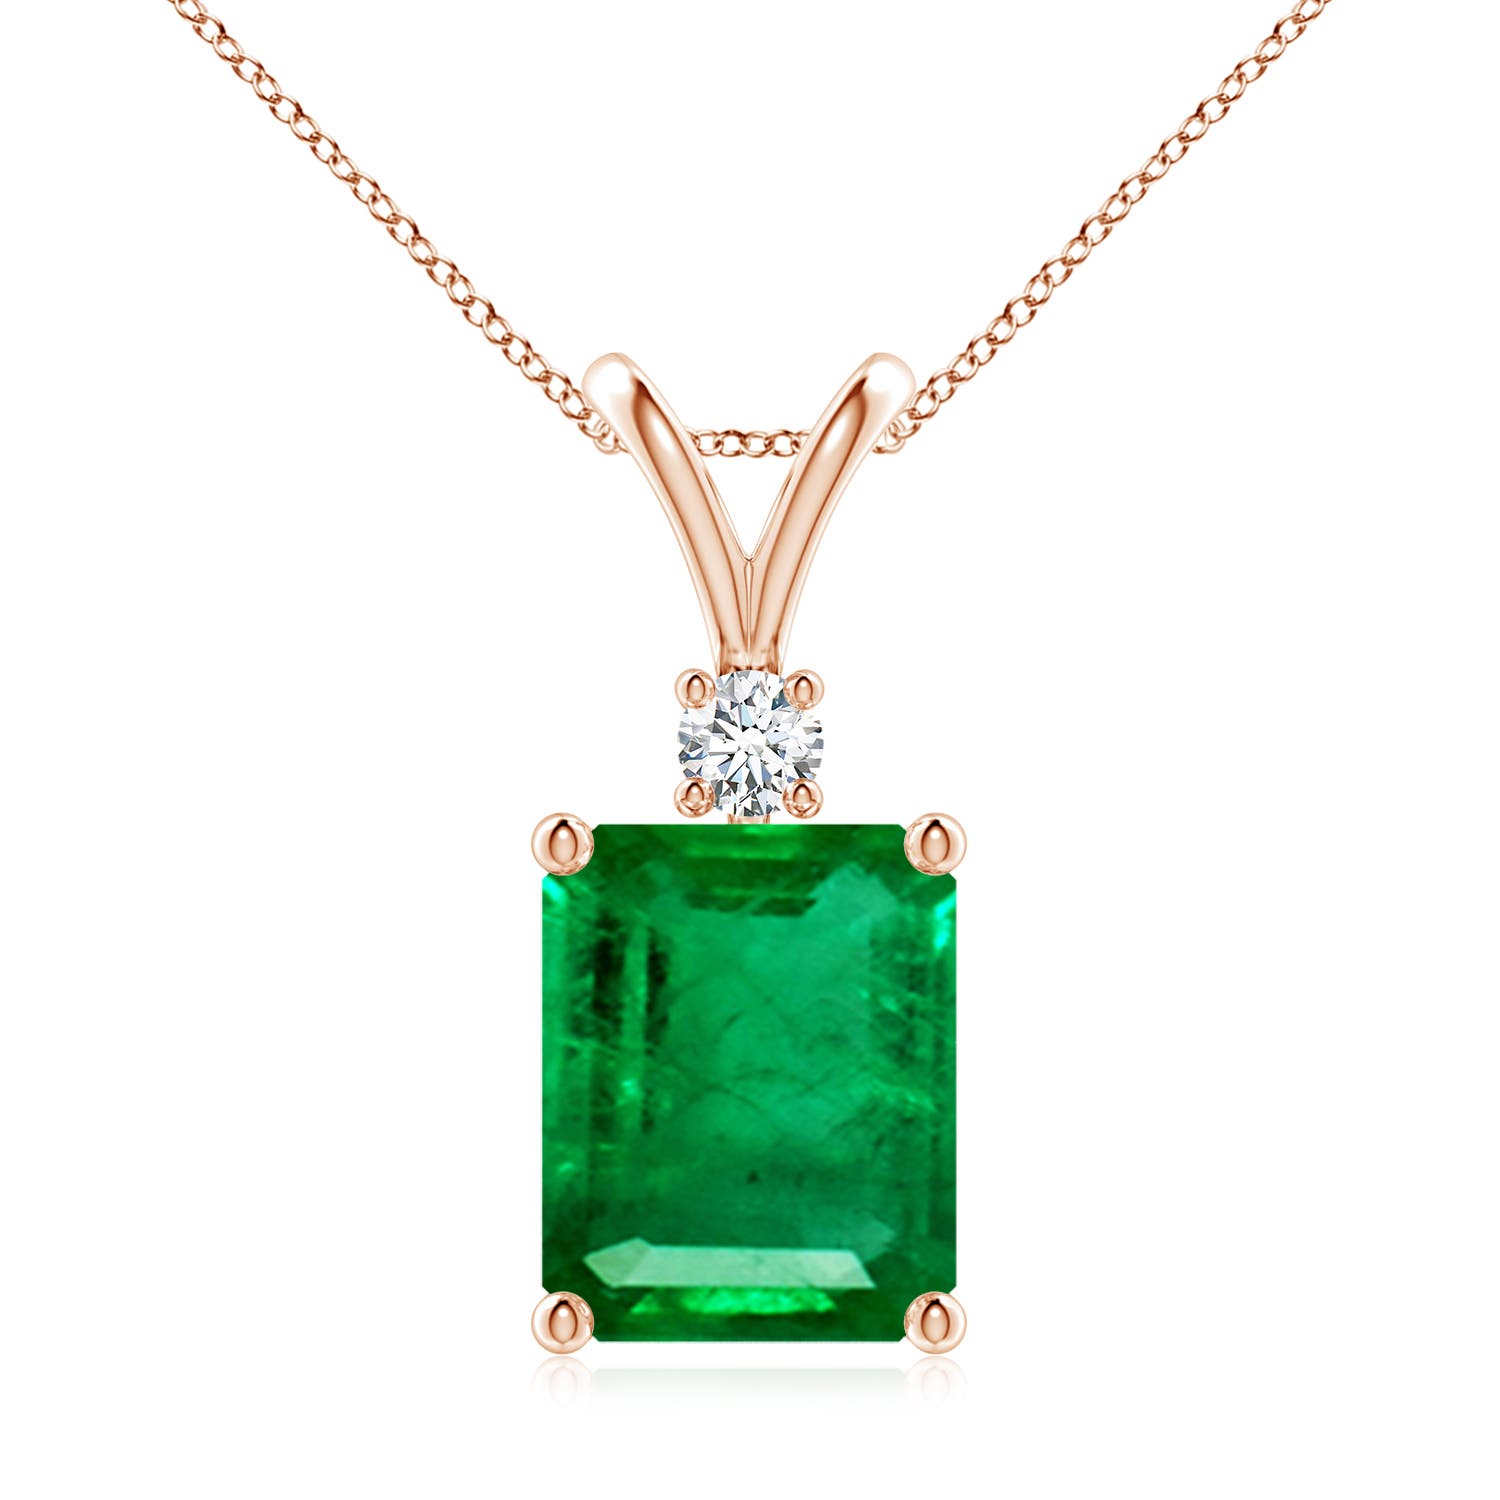 AAA - Emerald / 2.96 CT / 14 KT Rose Gold